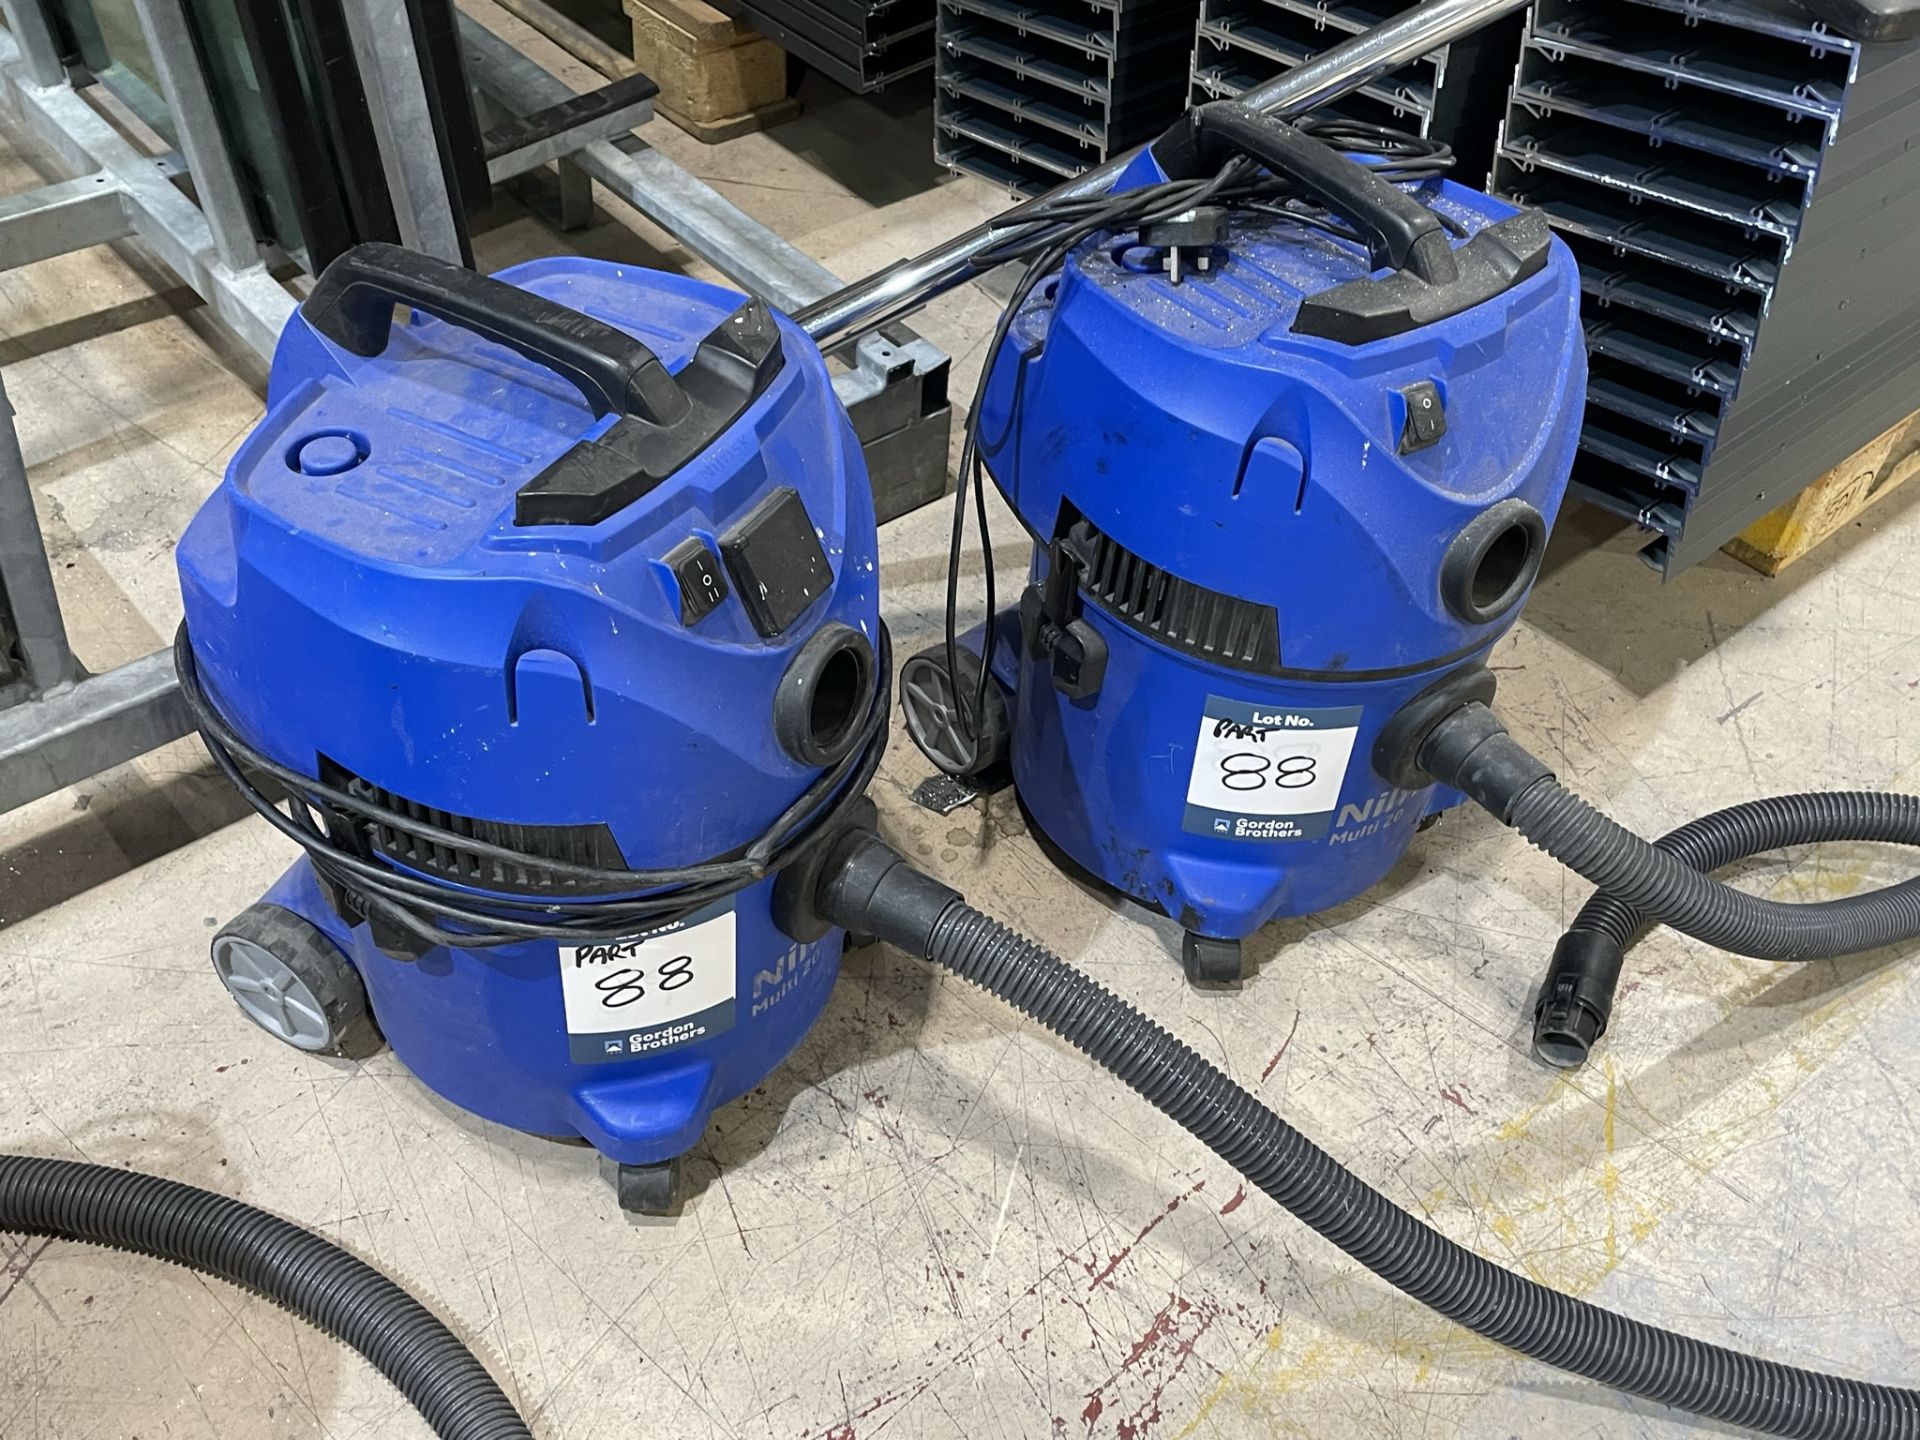 2x (no.) Nilfisk, Multi 20 commercial tub vacuum cleaners